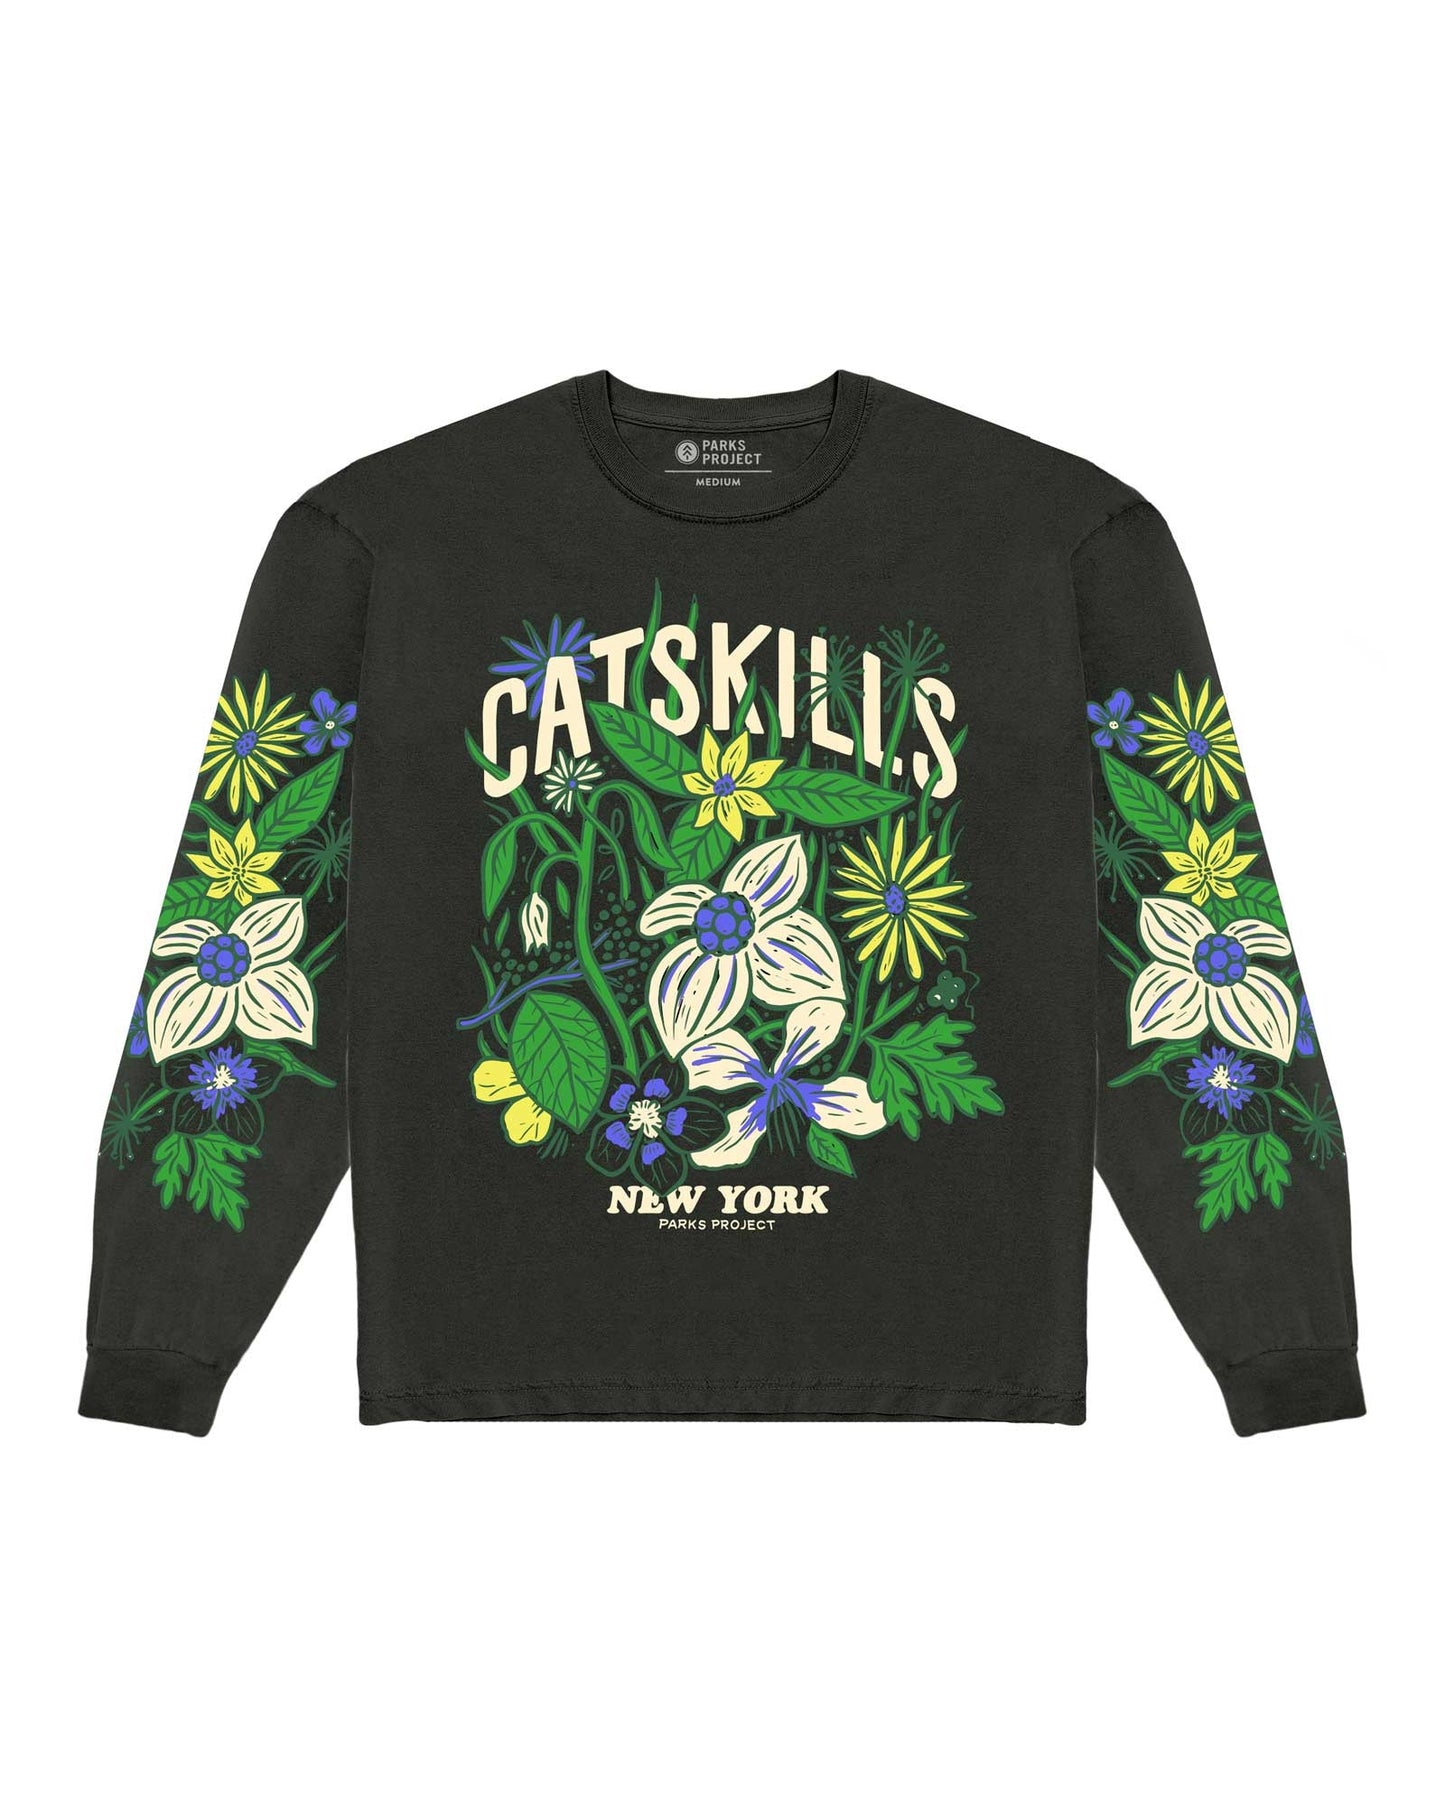 Parks Project Catskills Flower Patch Long Sleeve Tee - Black